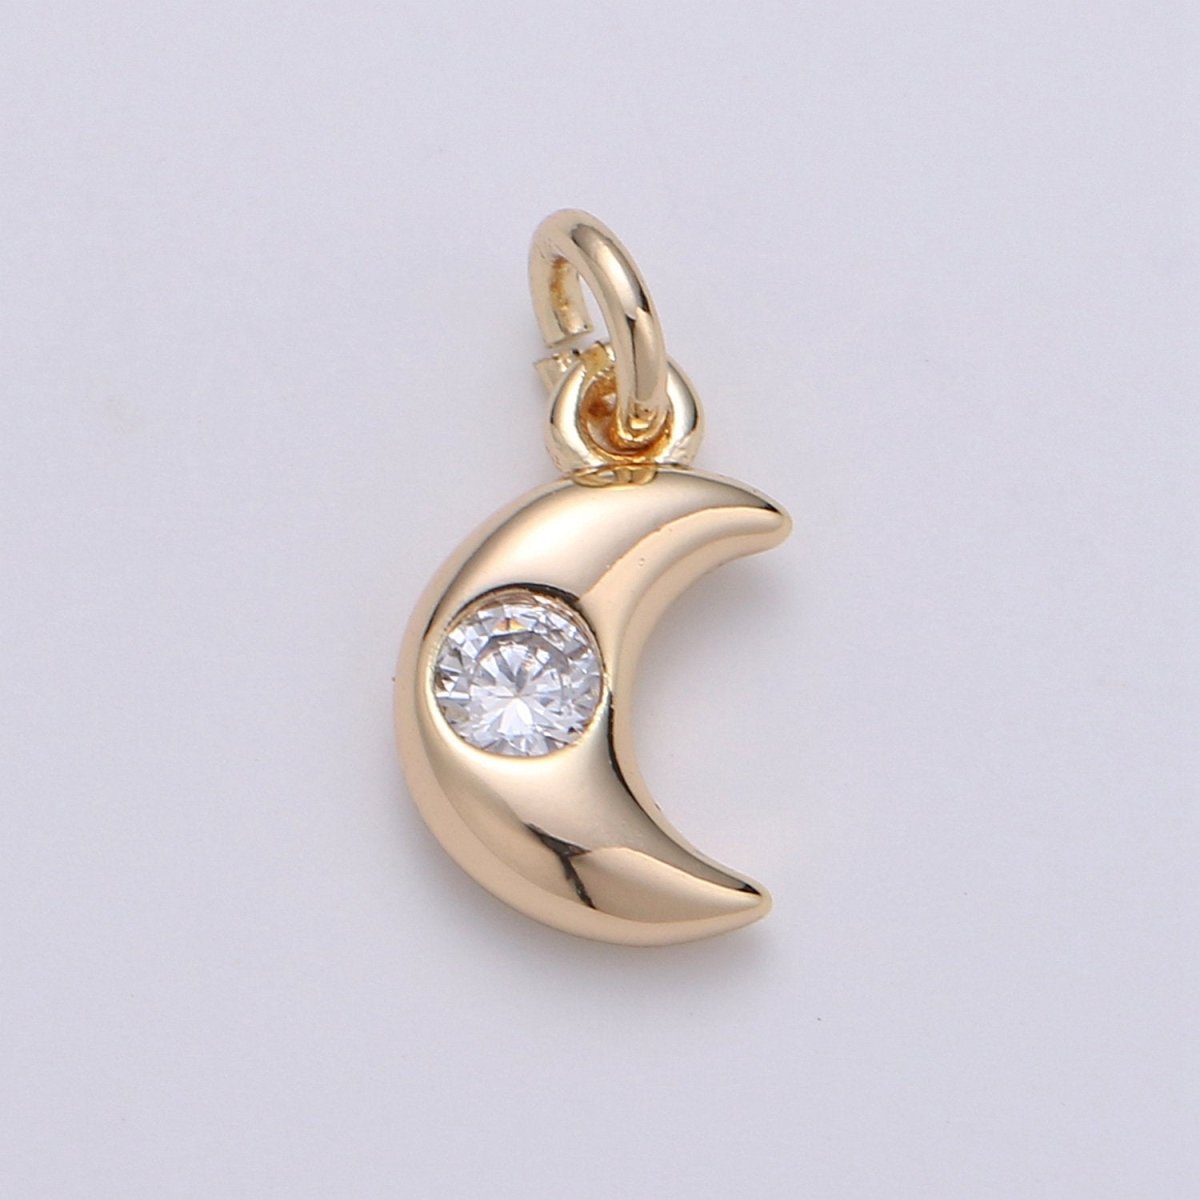 Mini Gold Crescent Moon Tiny CZ Charm - Gold Moon Charm with cubic zirconia for Bracelet, Necklace Earring Celestial Jewelry D-401 - DLUXCA